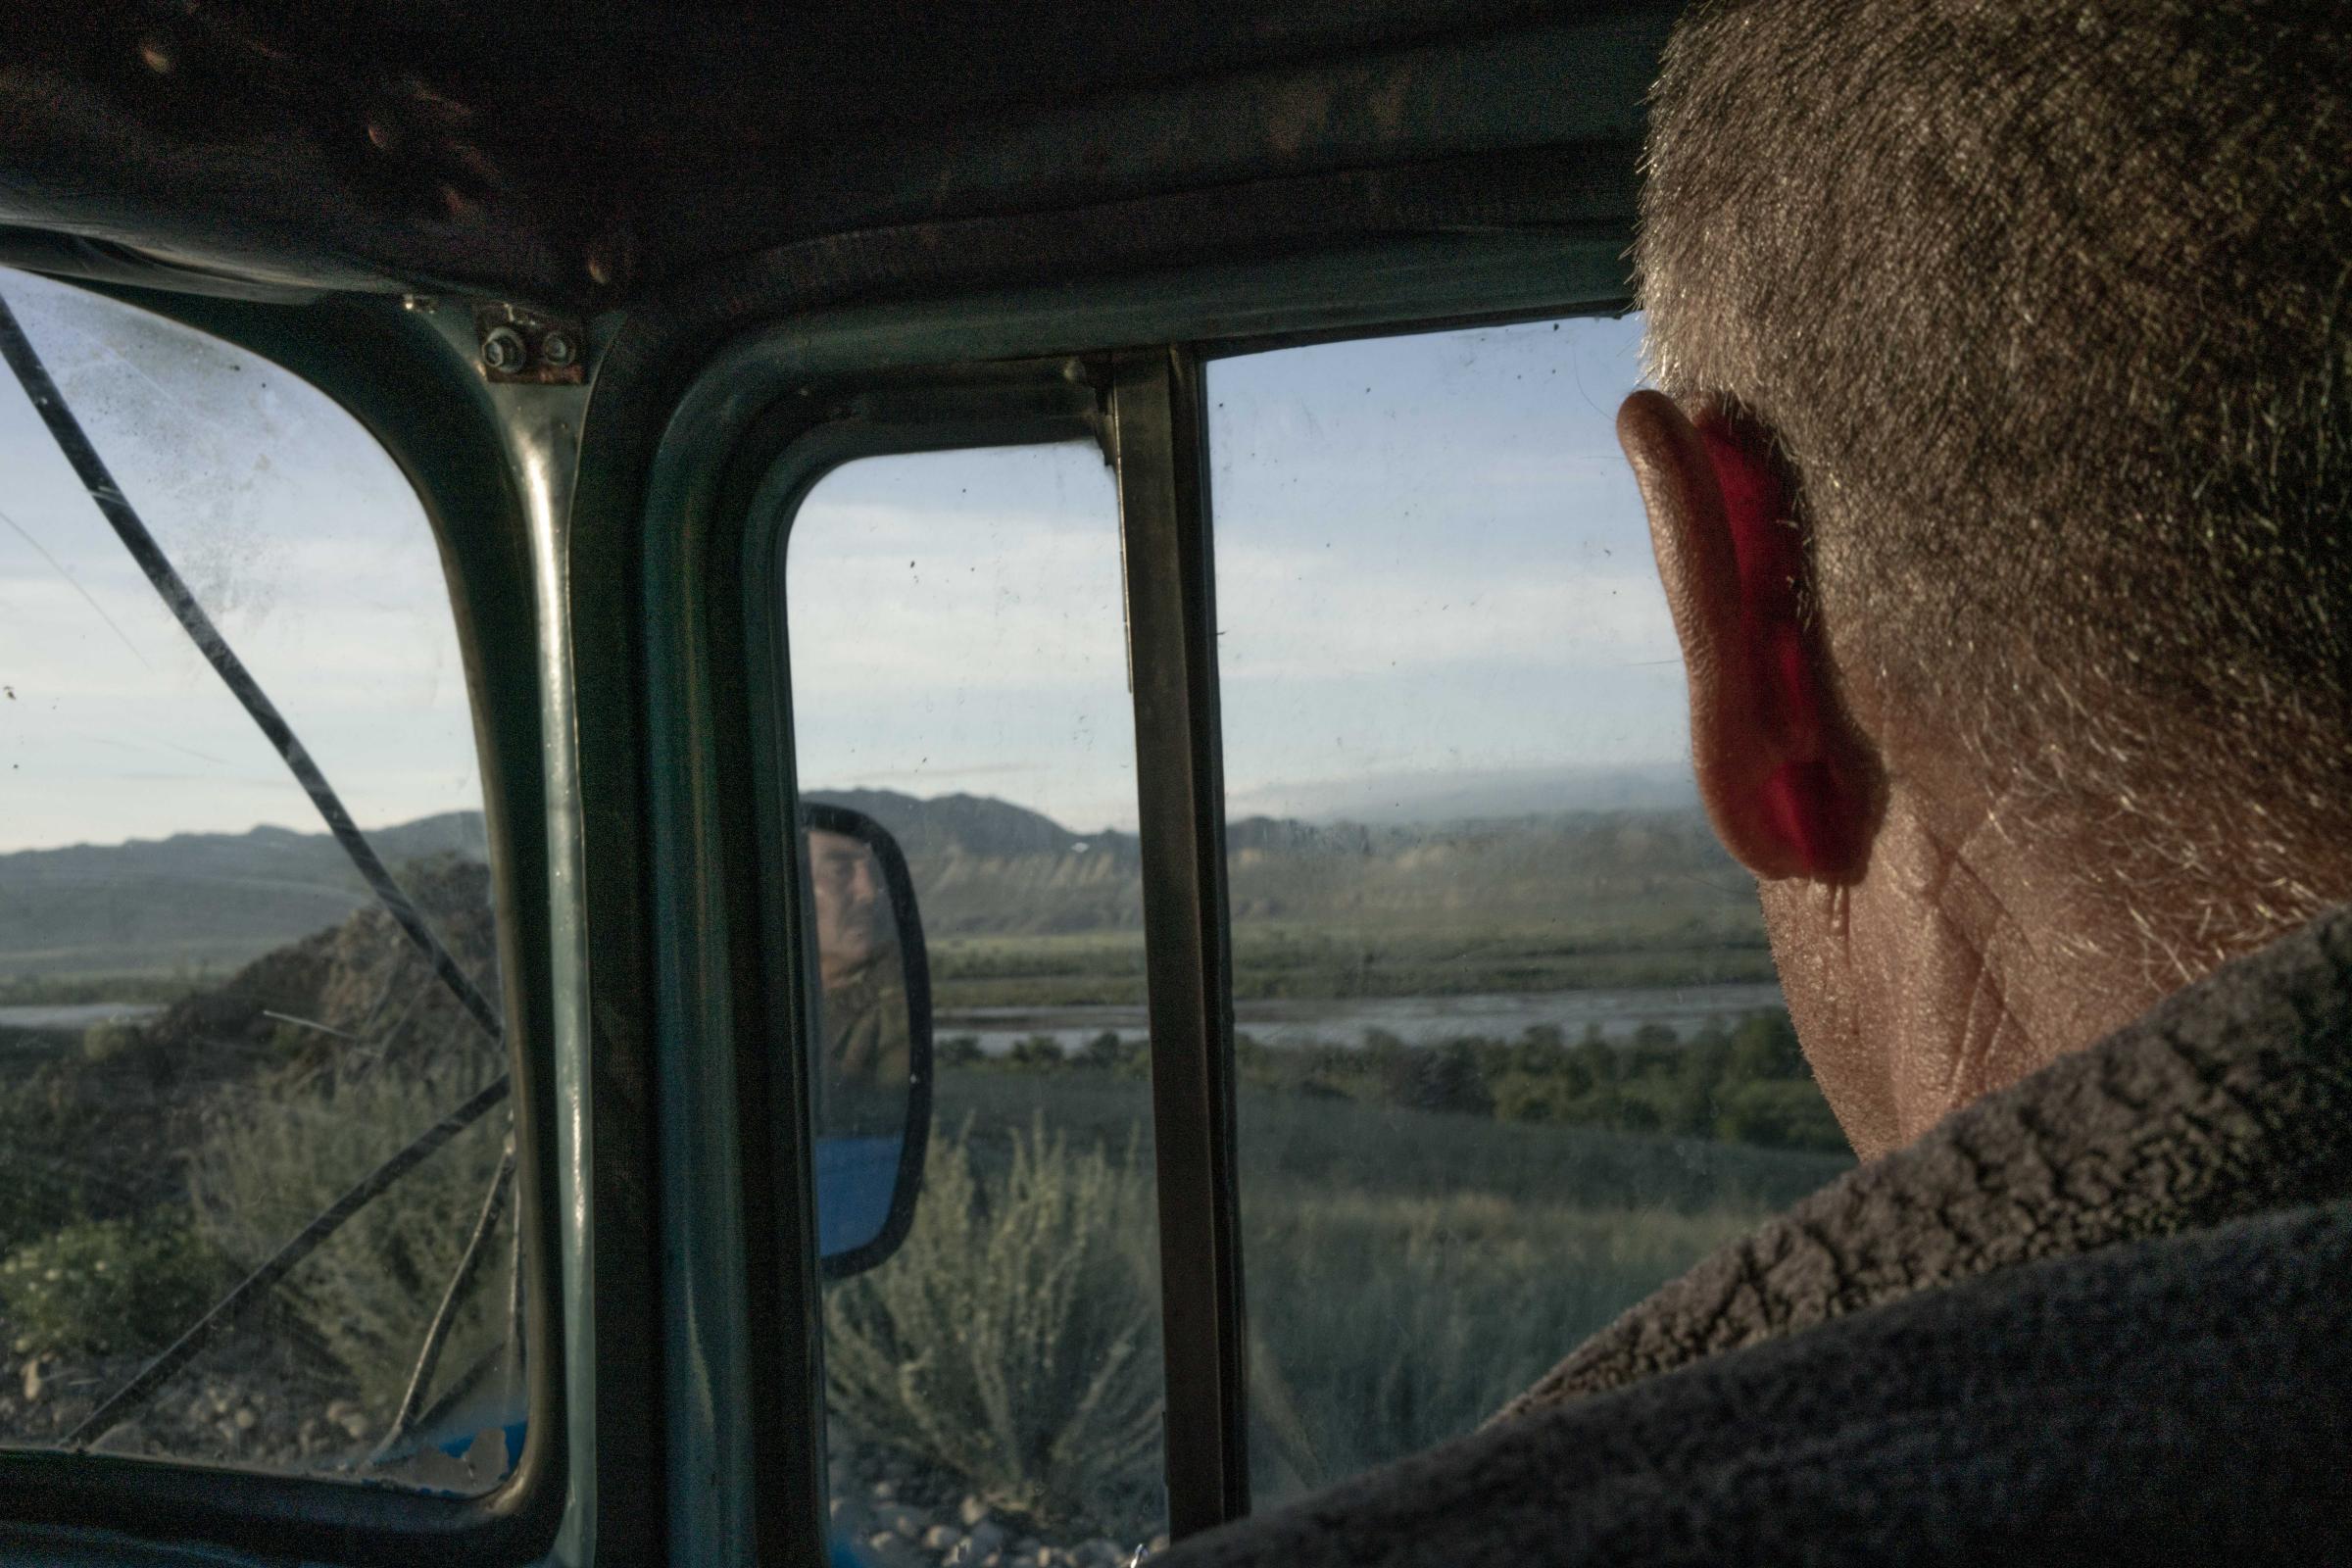 Nomads - Zamir looks out onto the gradually transforming landscape as he rides from the village of Akkya...